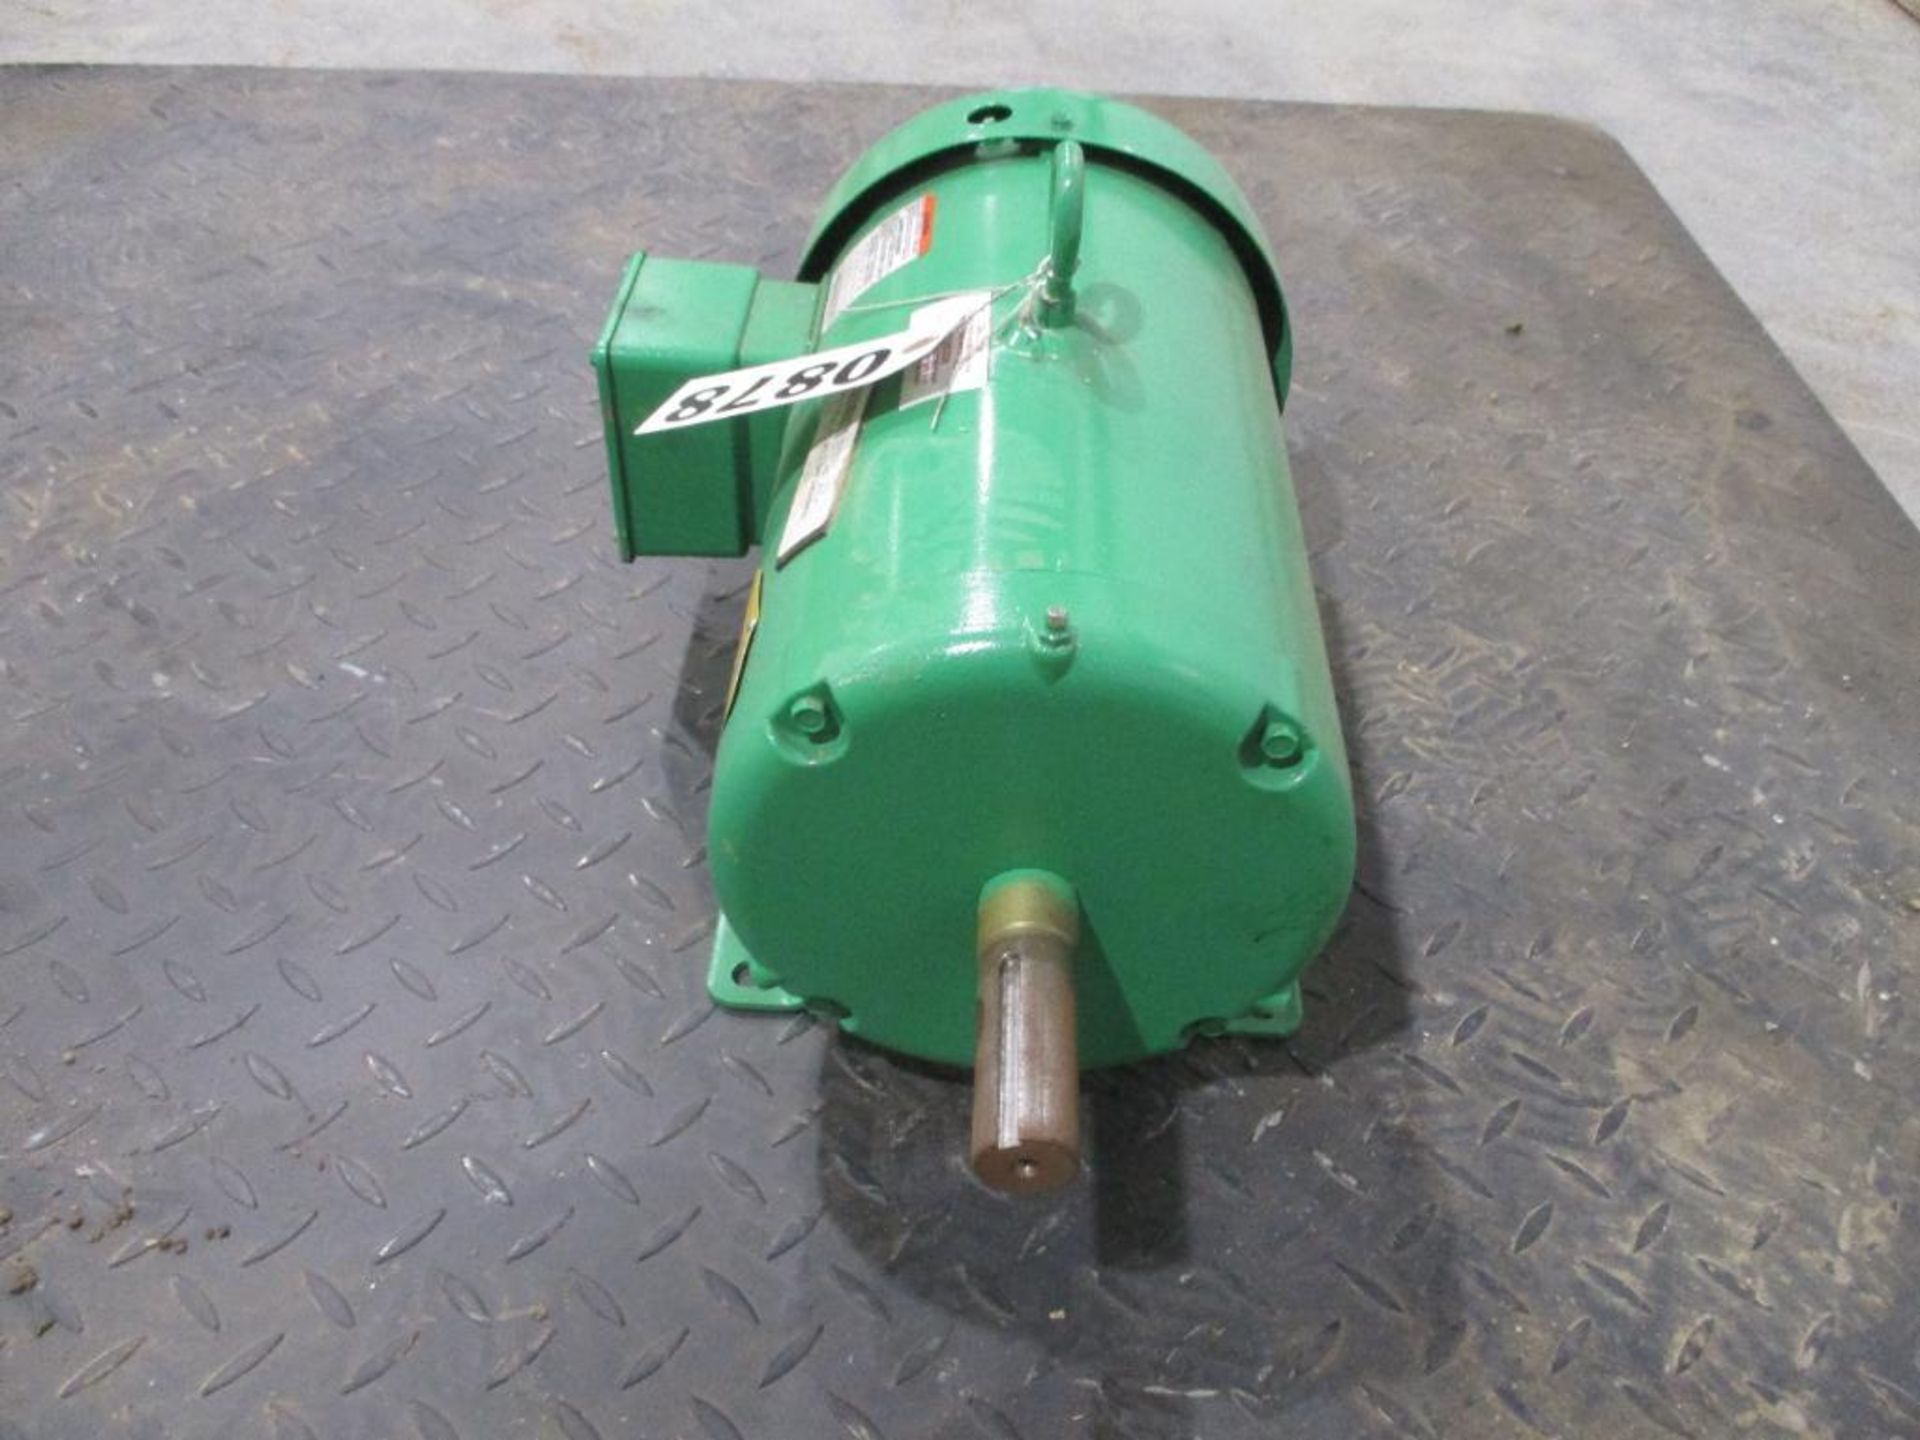 BALDOR 3 PHASE 7.5HP 184T FRAME A/C MOTOR P/N 1200712332-000020, 91# lbs (There will be a $40 Riggin - Image 2 of 5